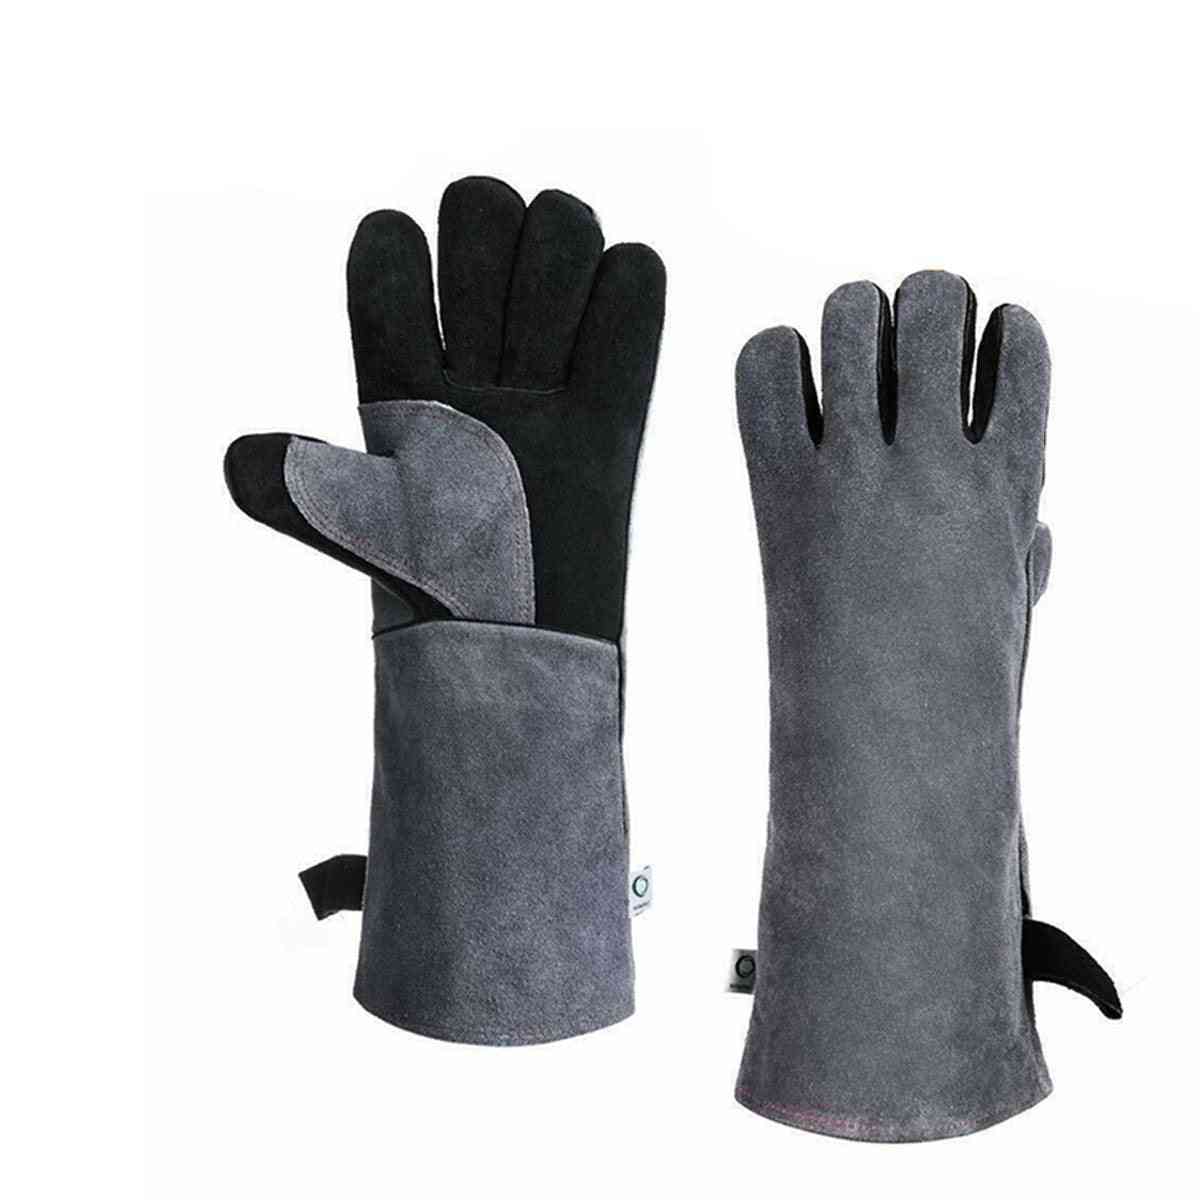 Welding Heat Resistant, Fireplace Stove, Bbq Gloves